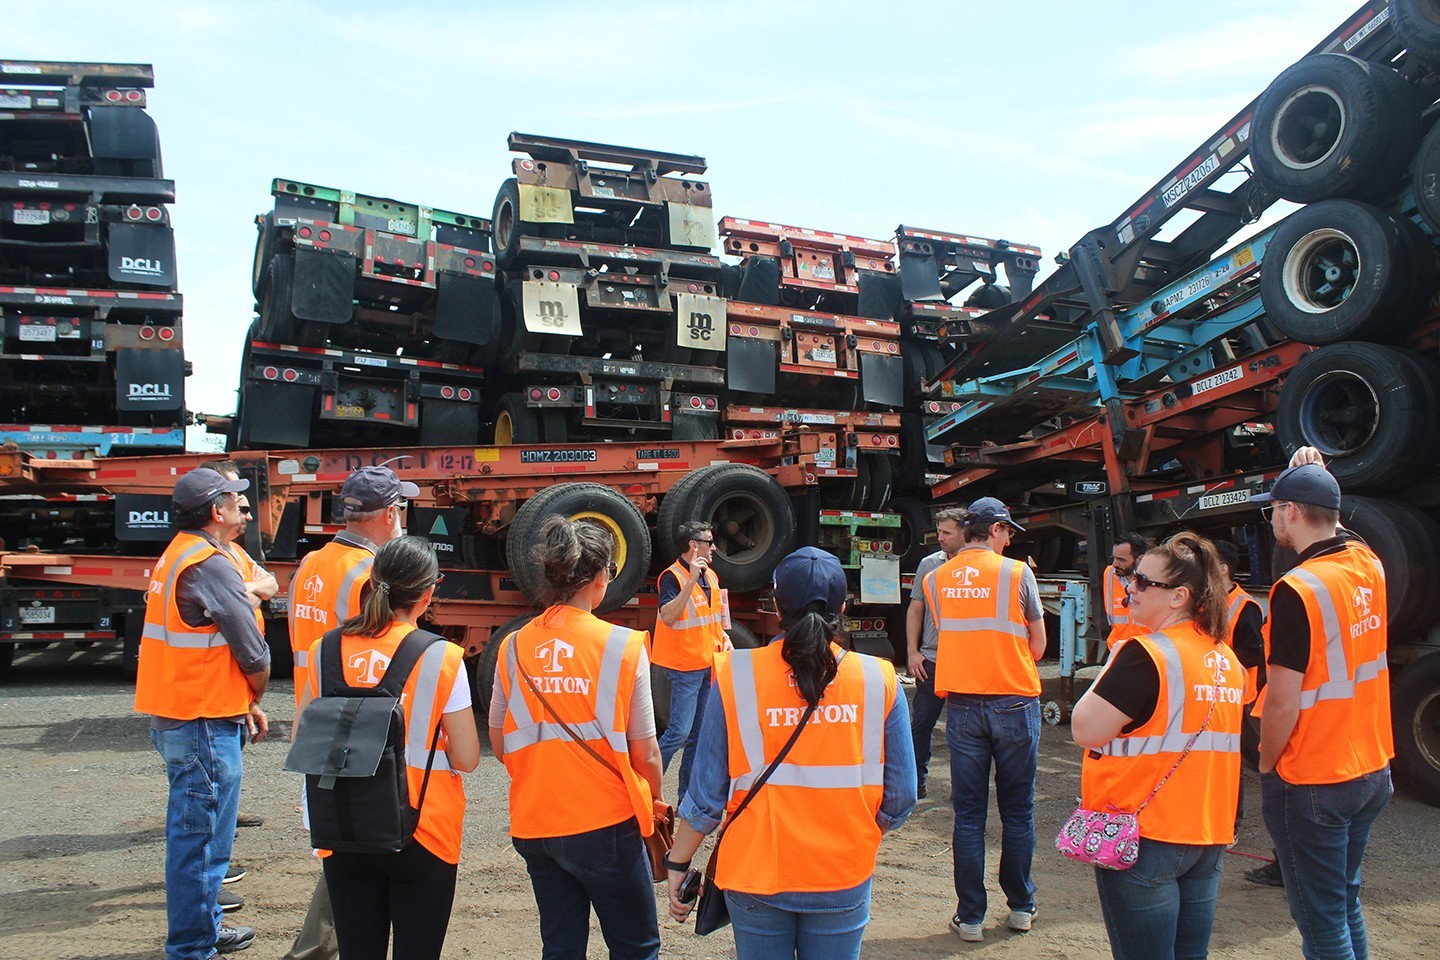 Every year Triton employees from all departments take a depot tour to learn how our container Operations Team works.  